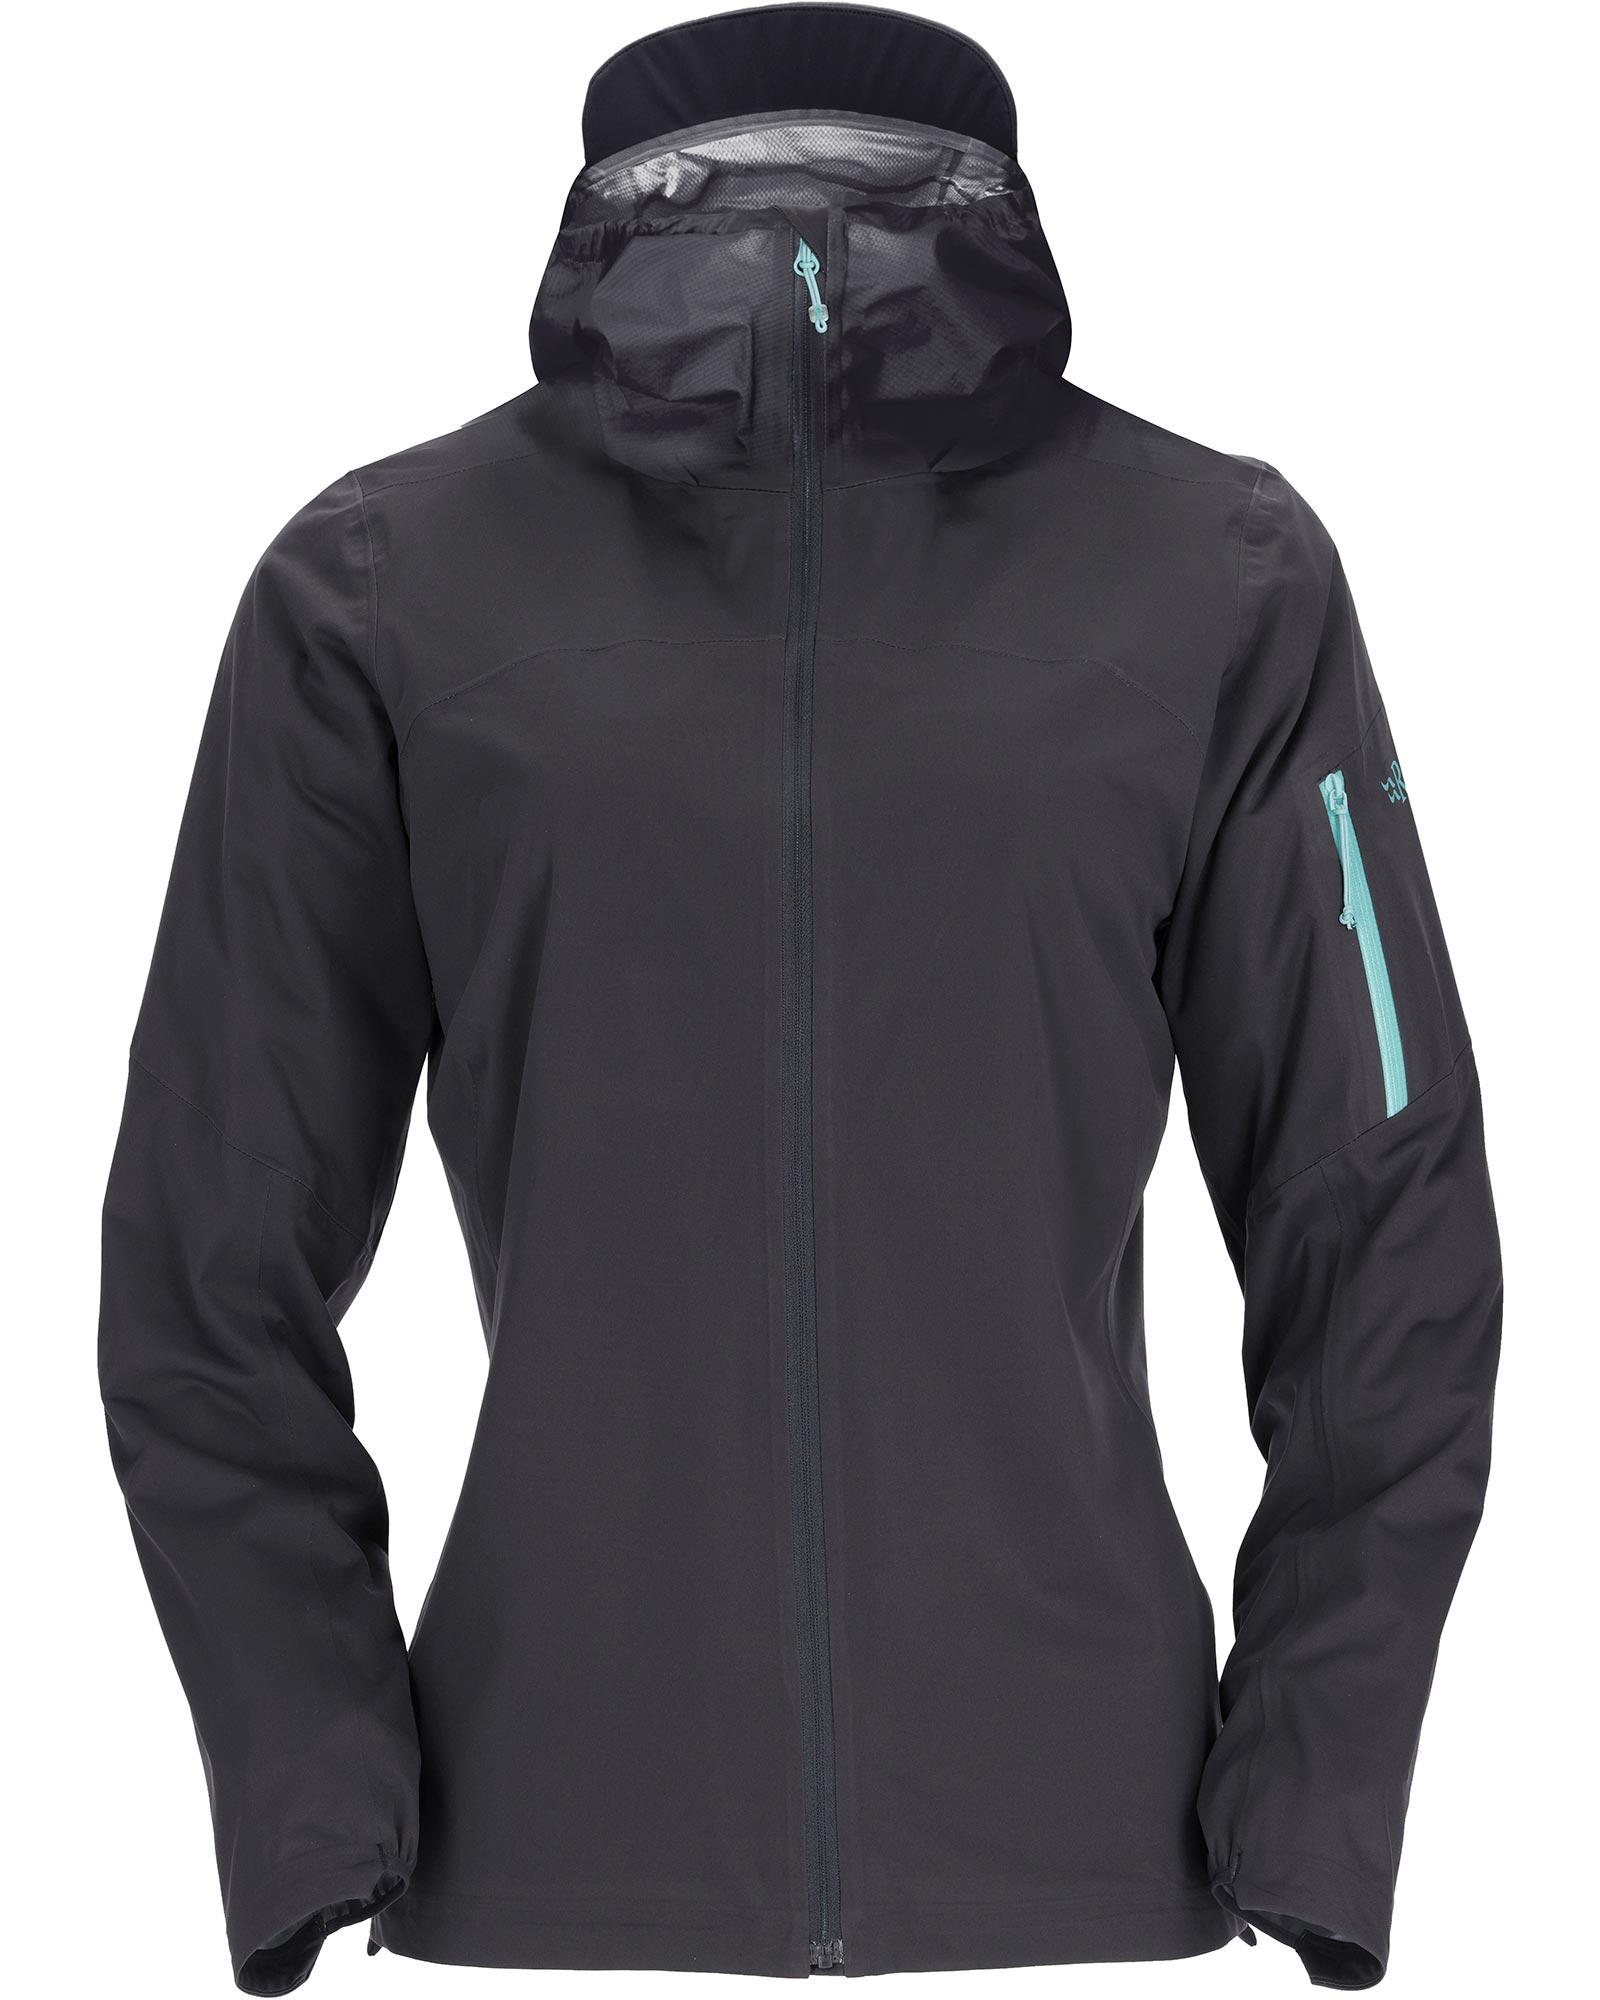 Rab Kinetic Ultra Women’s Jacket - Anthracite 12